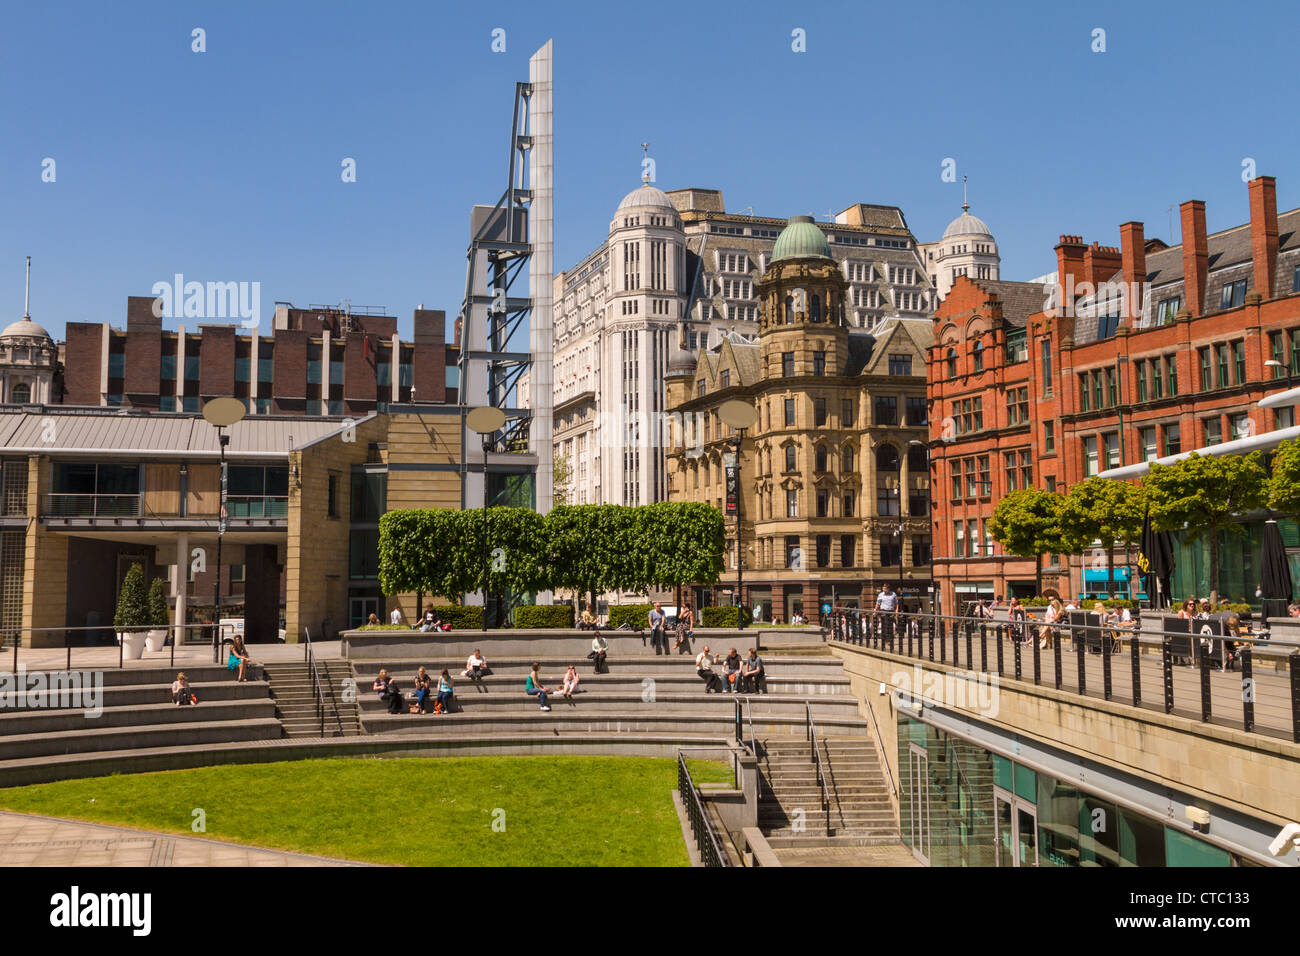 Grand Nord du Square, Manchester, Angleterre Banque D'Images